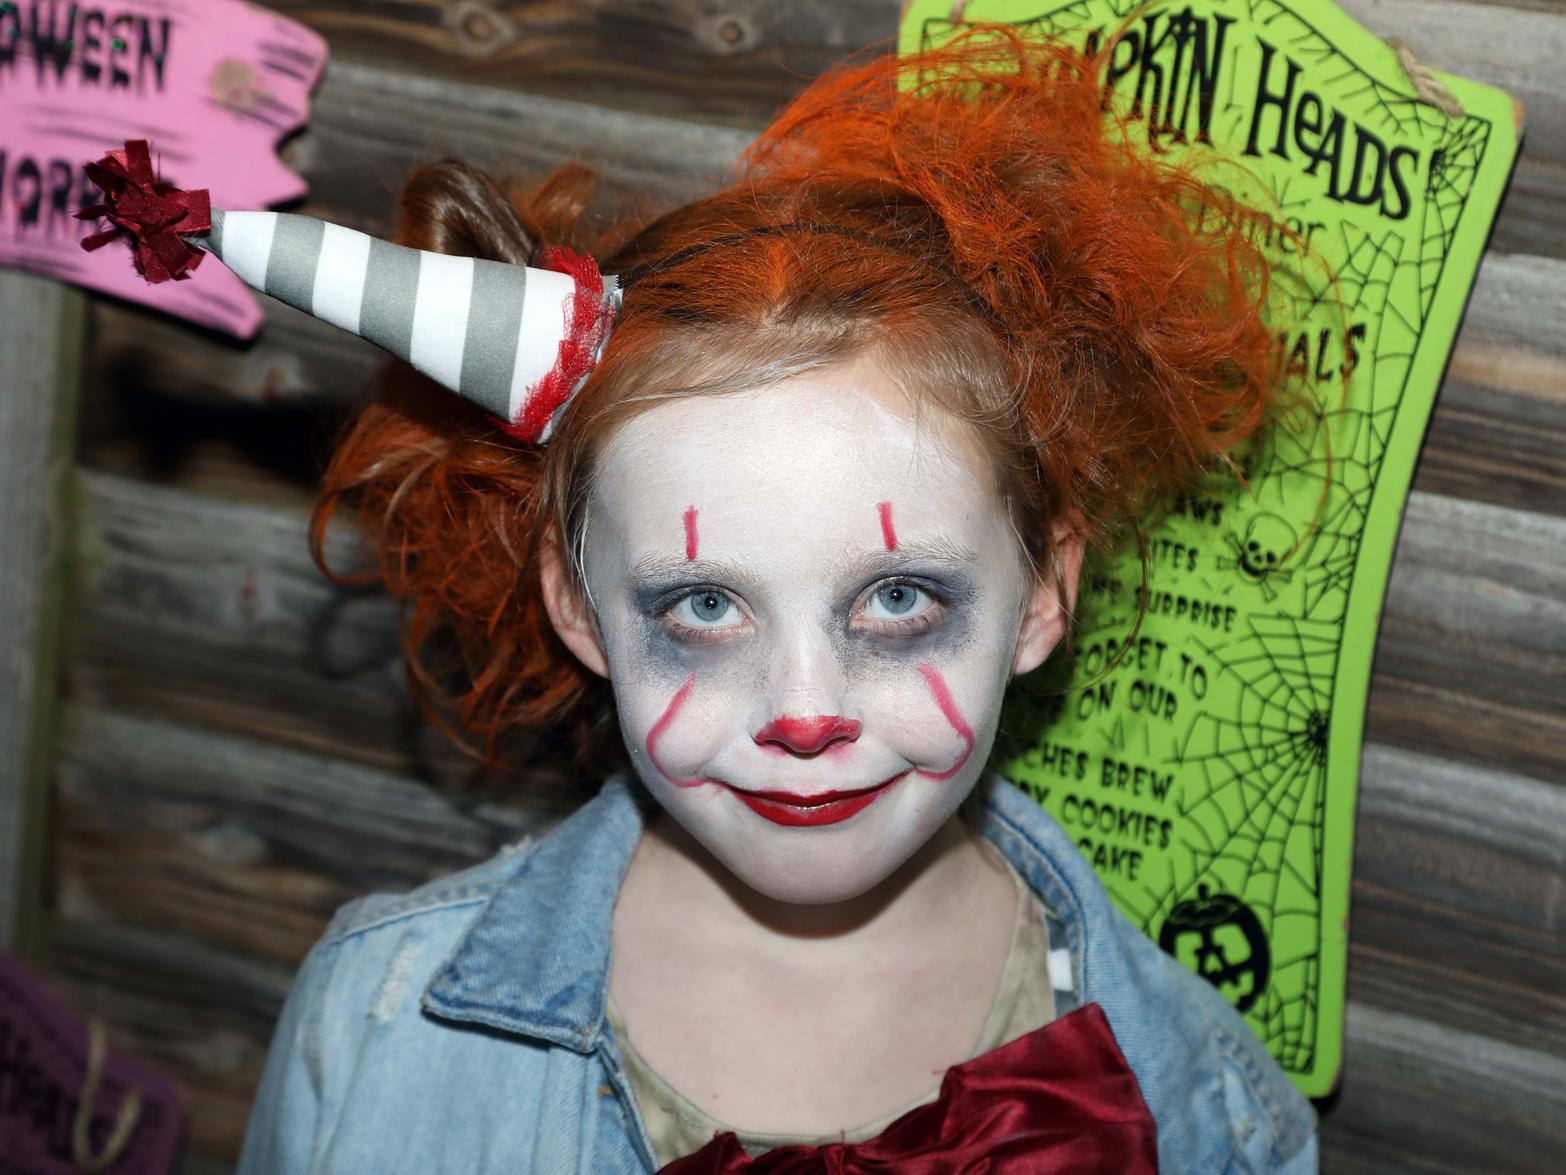 This young clown was almost as scary as the one in the House of Horrors!